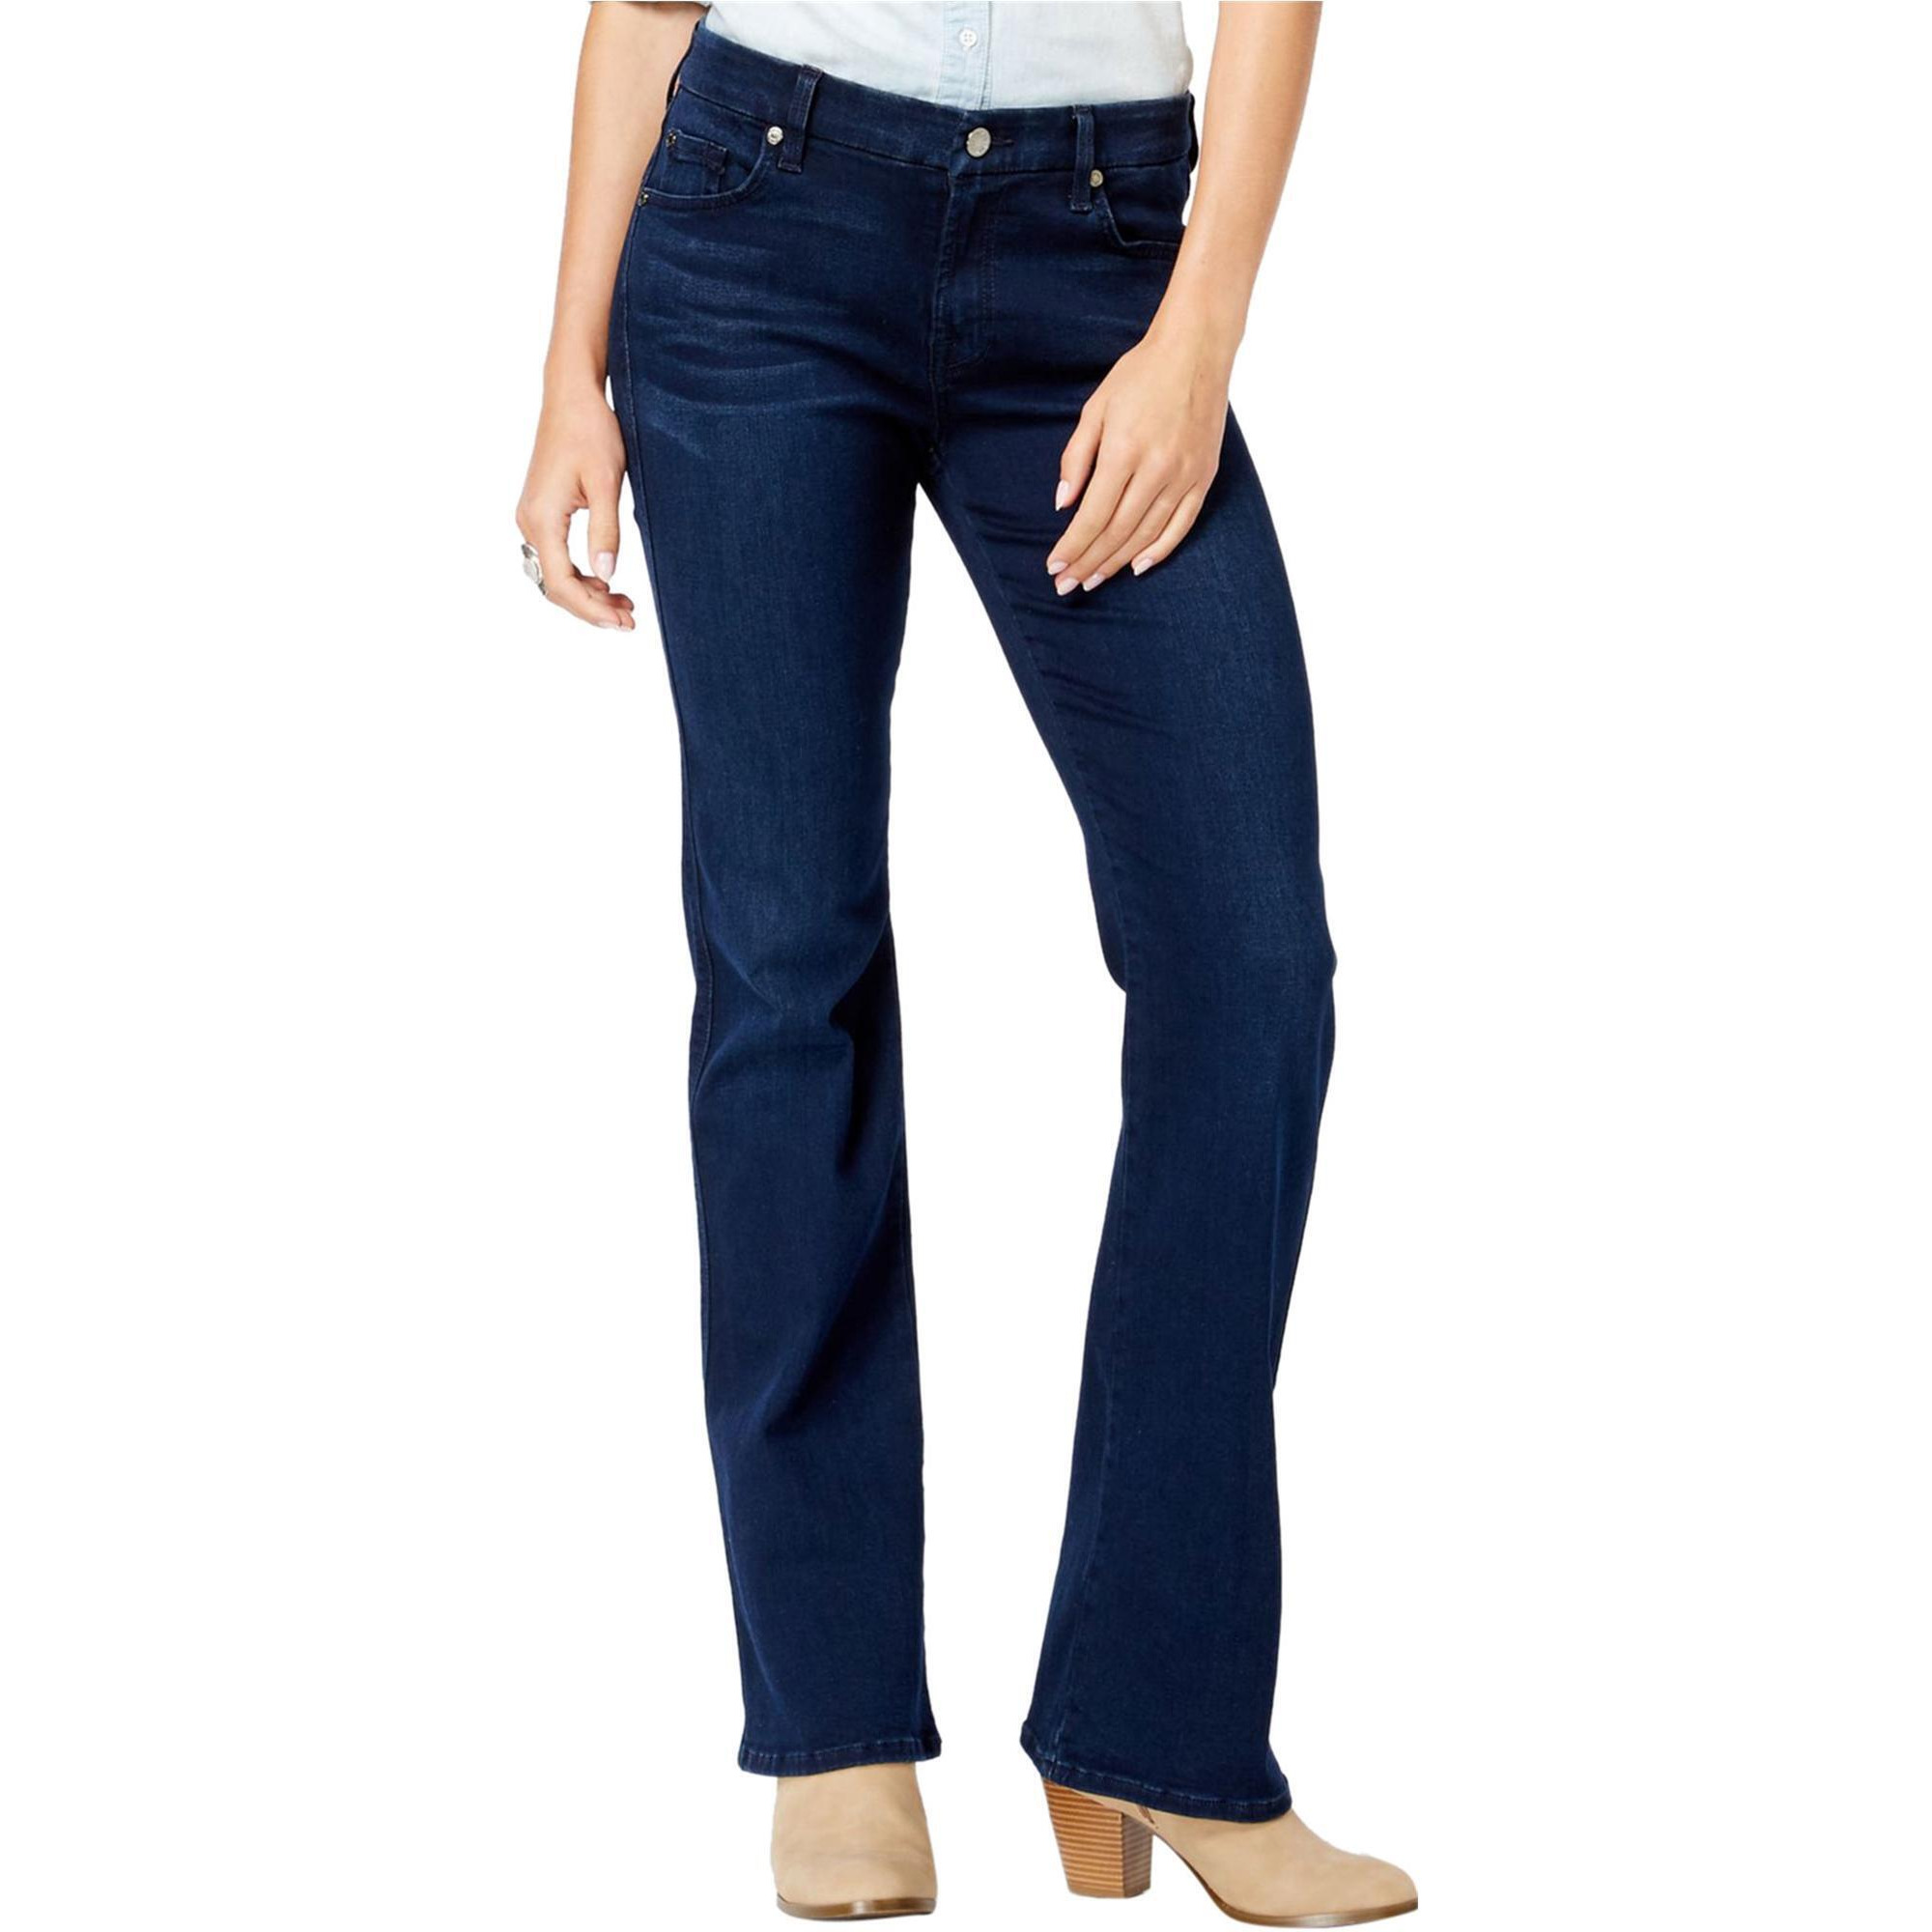 7 For All ManKind Womens 'A' Pocket Boot Cut Jeans, Style # AU130Y144C alternate image